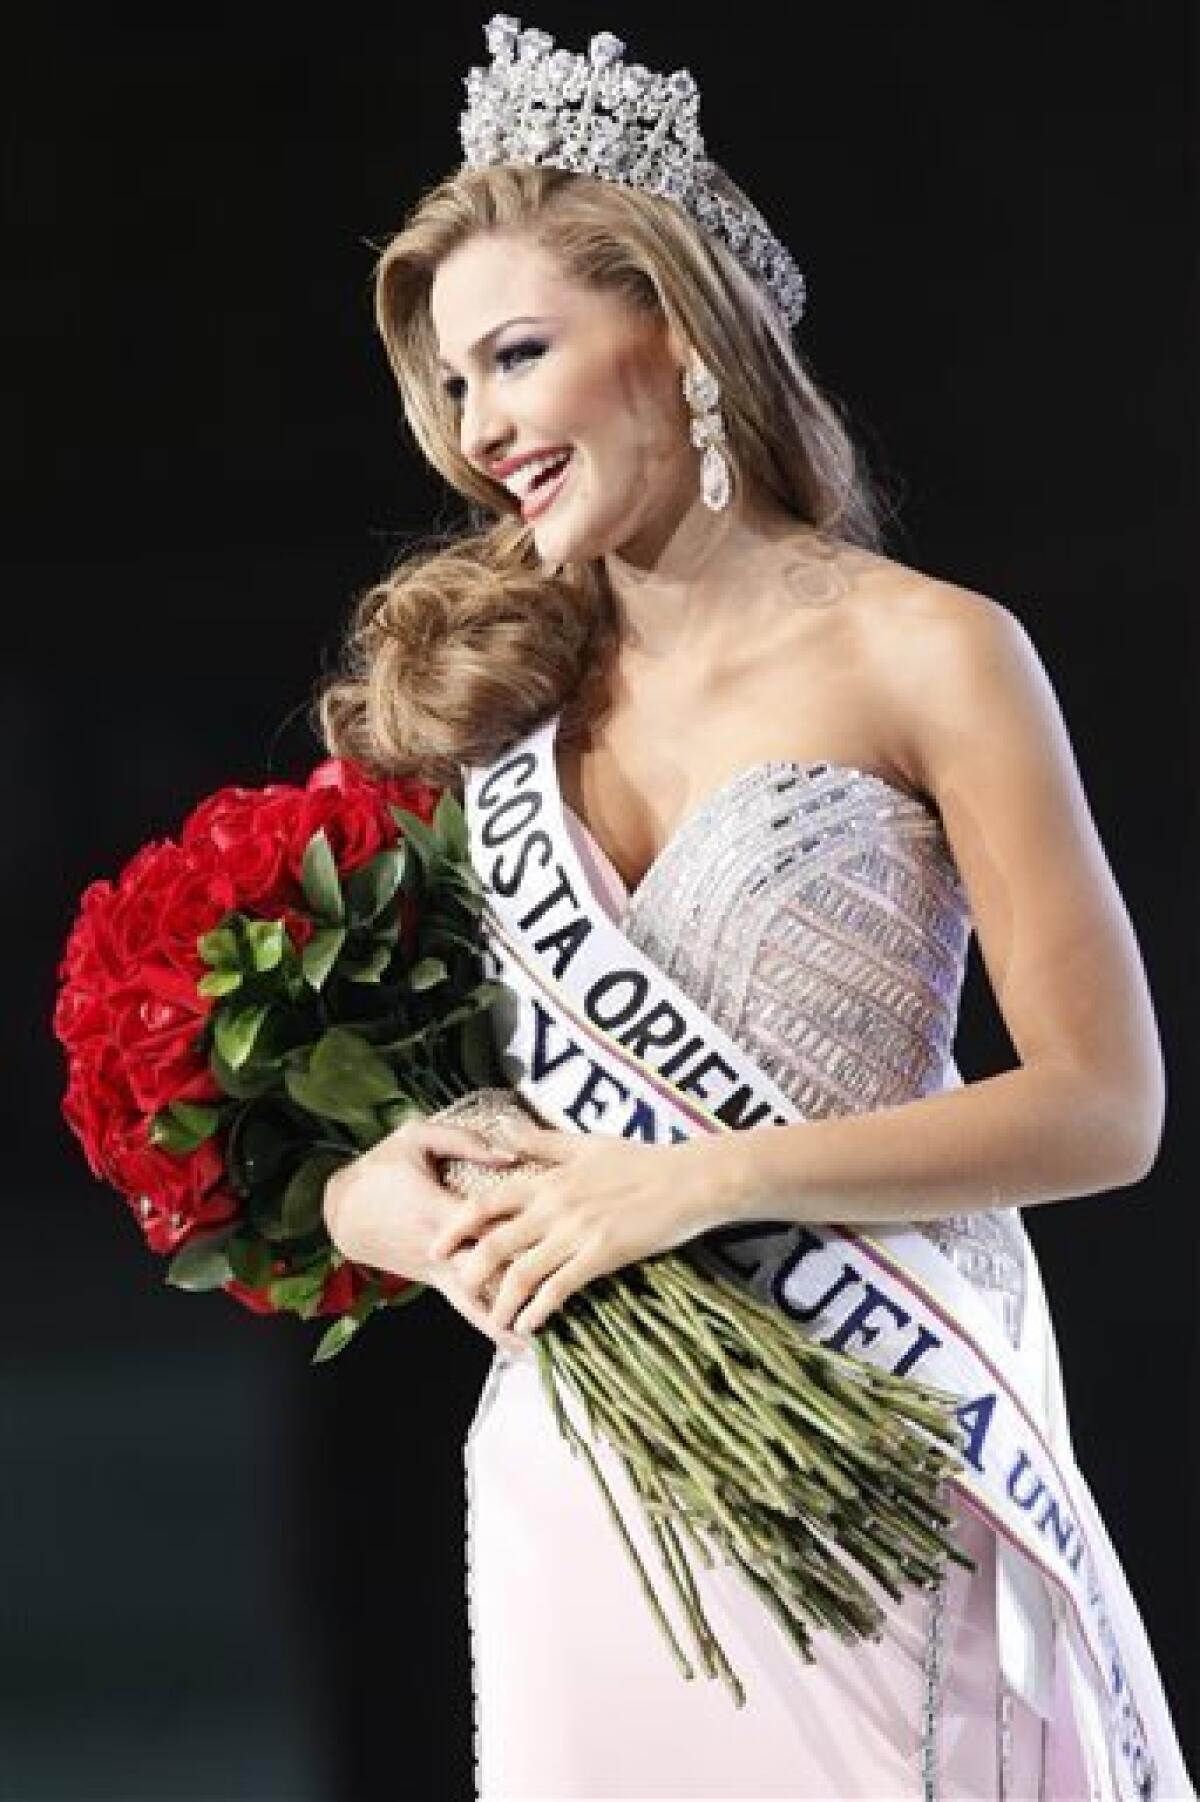 Miss Costa Oriente, Migbelis Castellanos smiles after being crowned as Miss Venezuela 2013 during the beauty pageant in Caracas, Venezuela, Thursday, Oct. 10, 2013. (AP Photo/Ariana Cubillos)